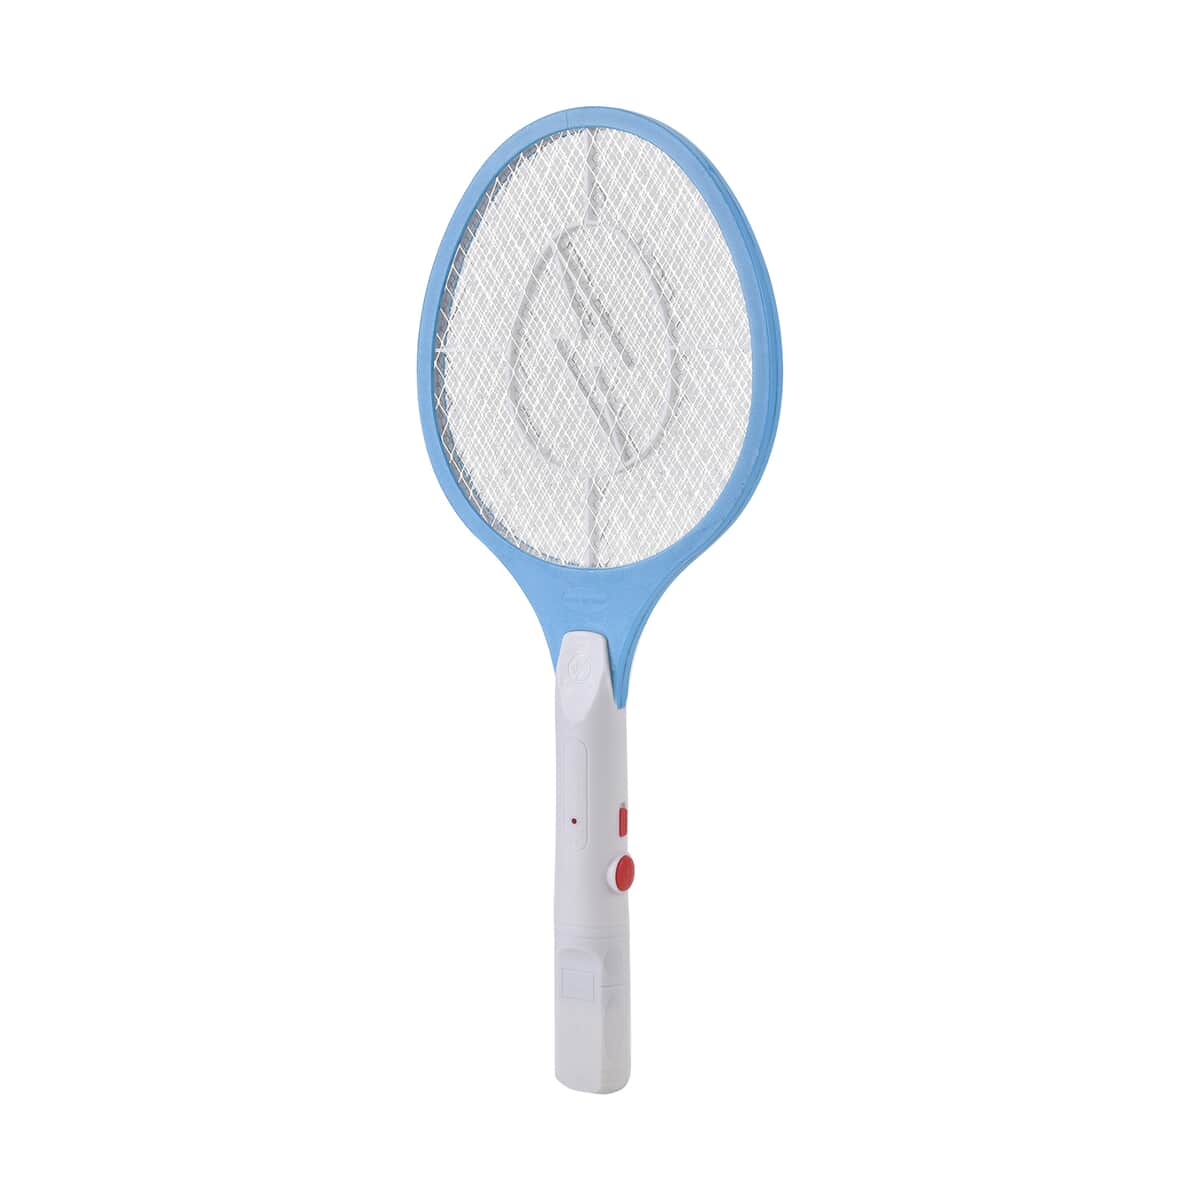 Rechargeable Handheld Zapper Mosquito Swatter - Blue (Powered by USB Cable) (19.6") image number 2